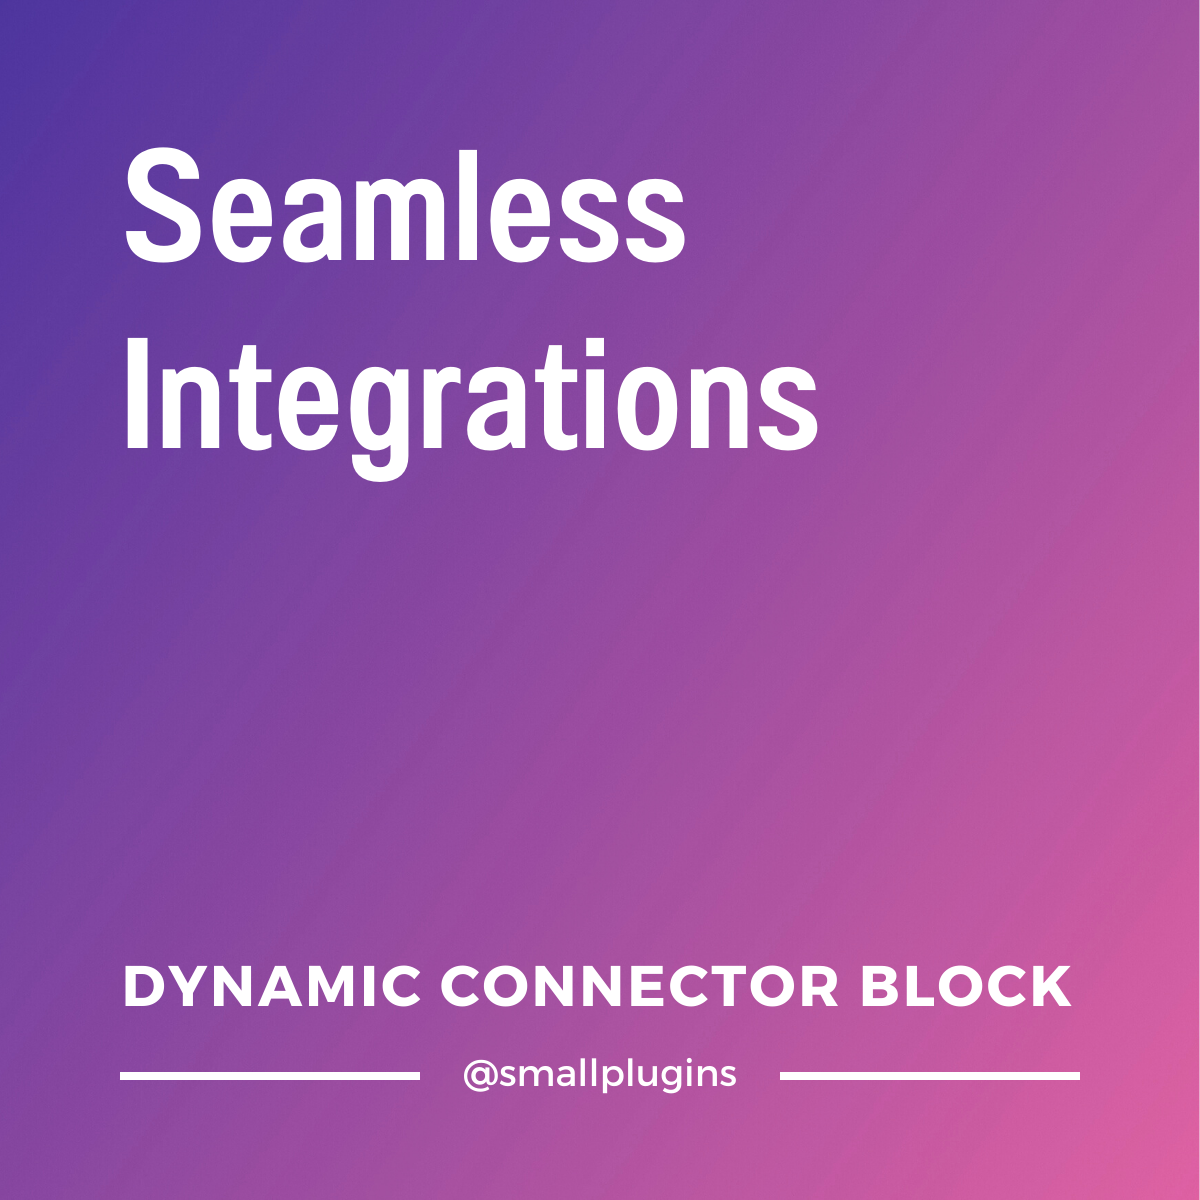 Dynamic Connector Block: seamless integrations